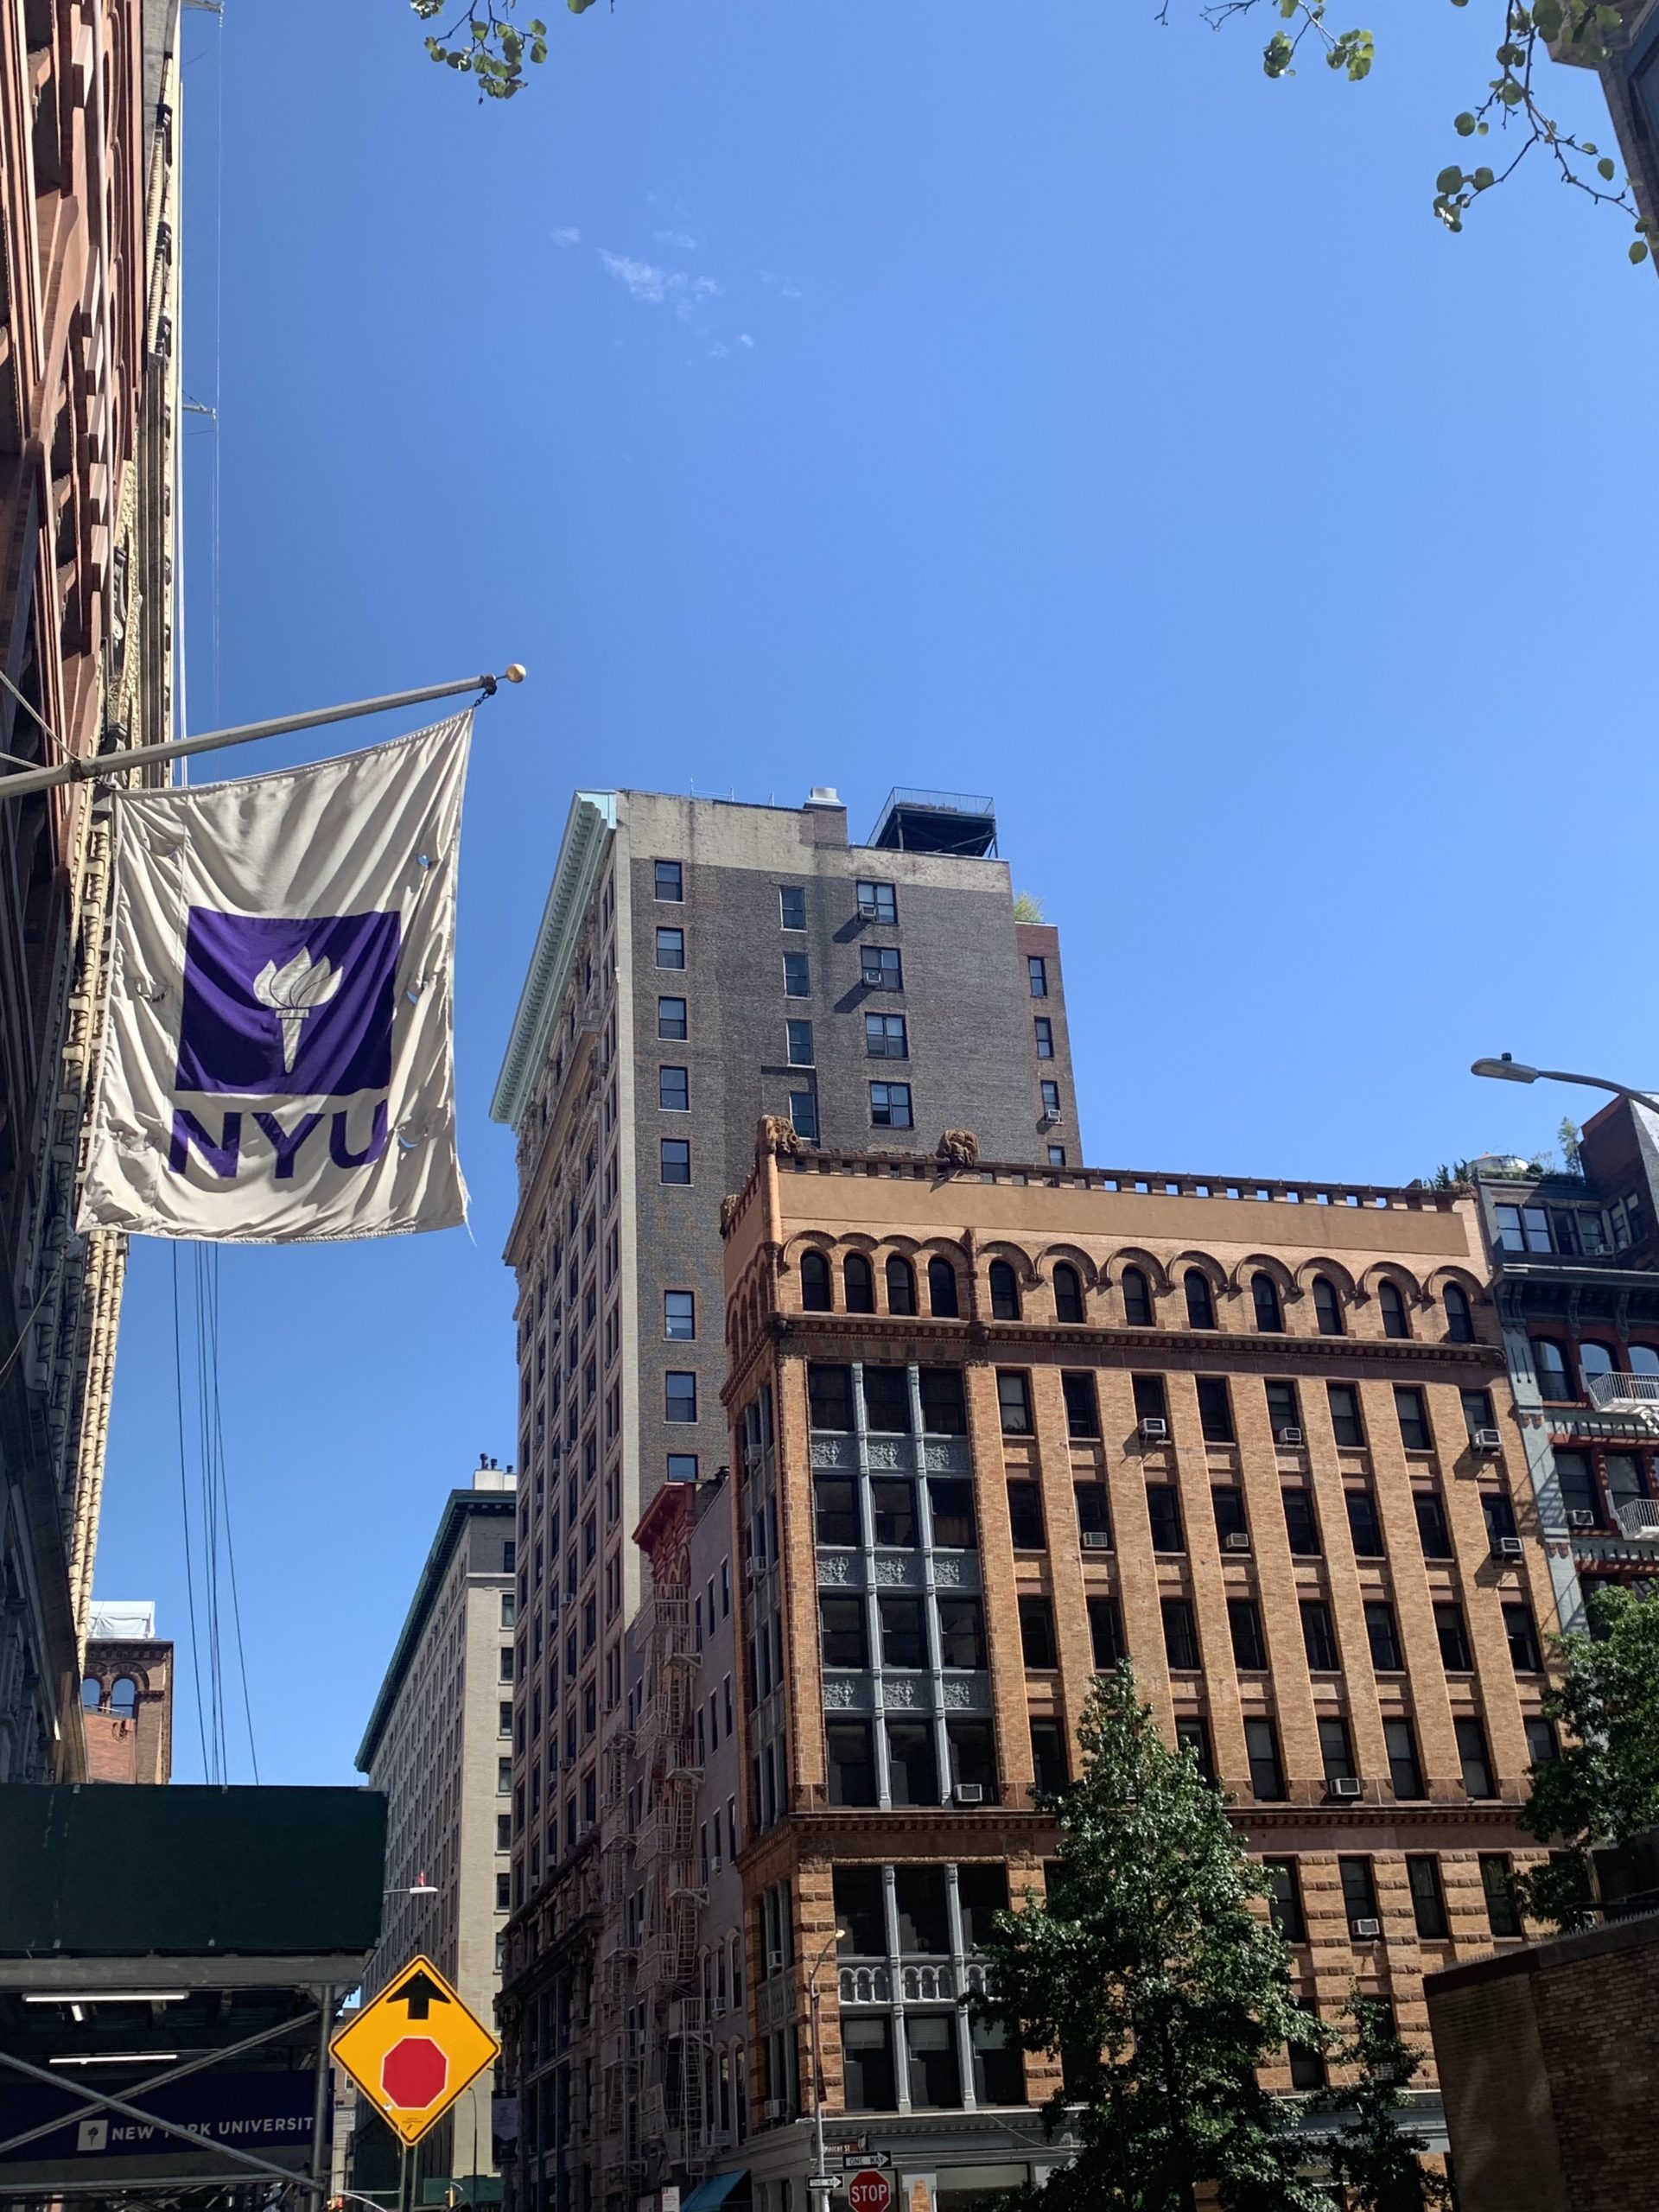 NYU buildings and a flag.